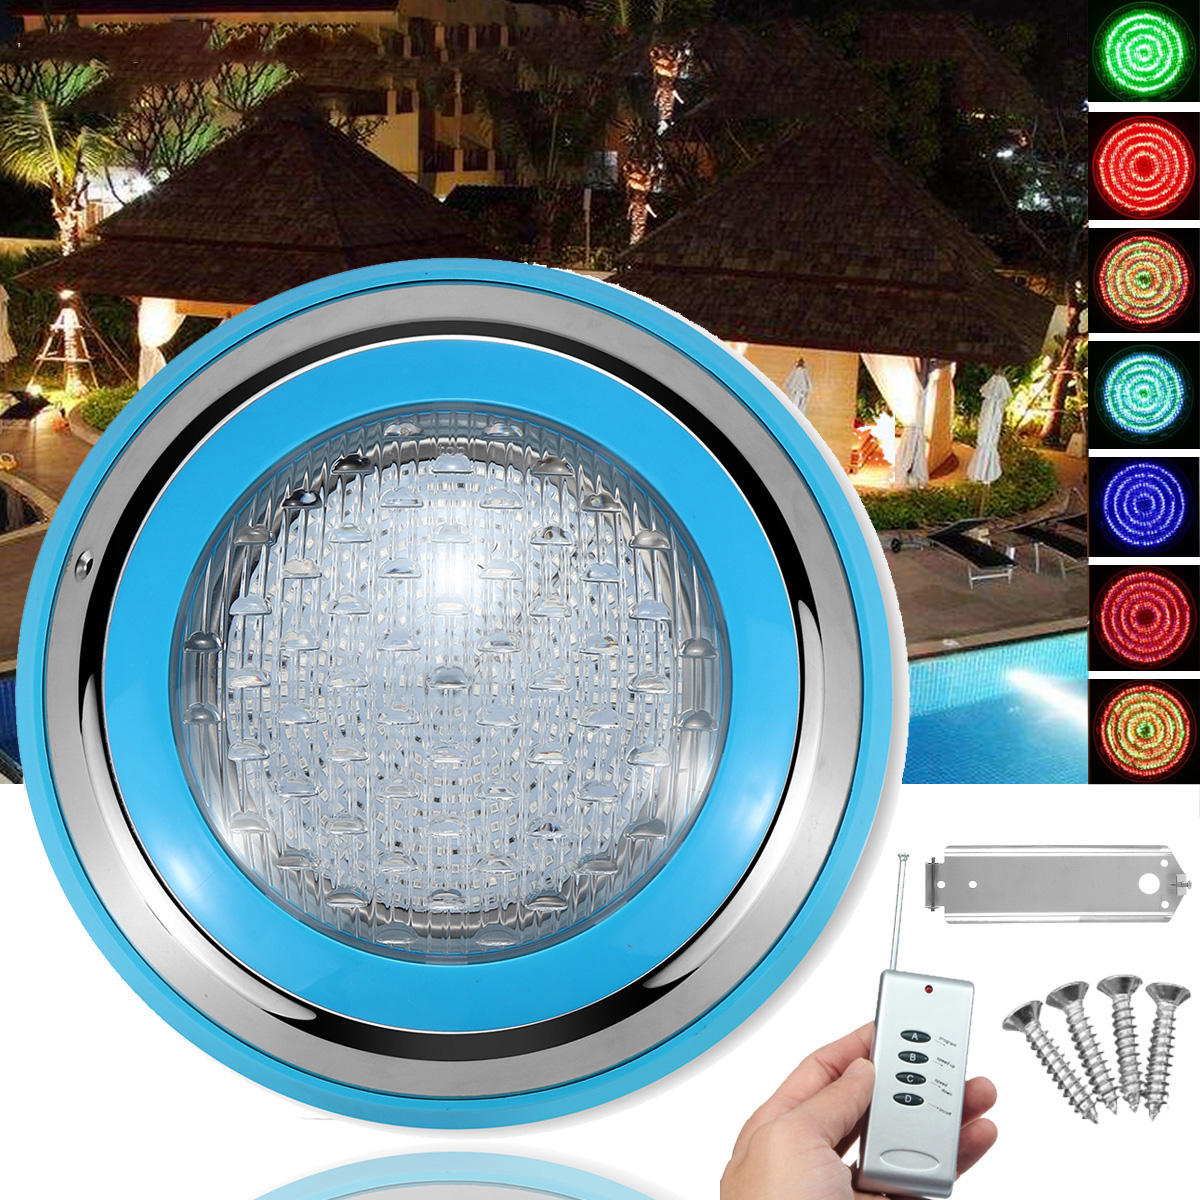 45W RGB Swimming Pool Fountain LED Light Colorful IP68 Waterproof Flash Lamp With Remote Control Switch